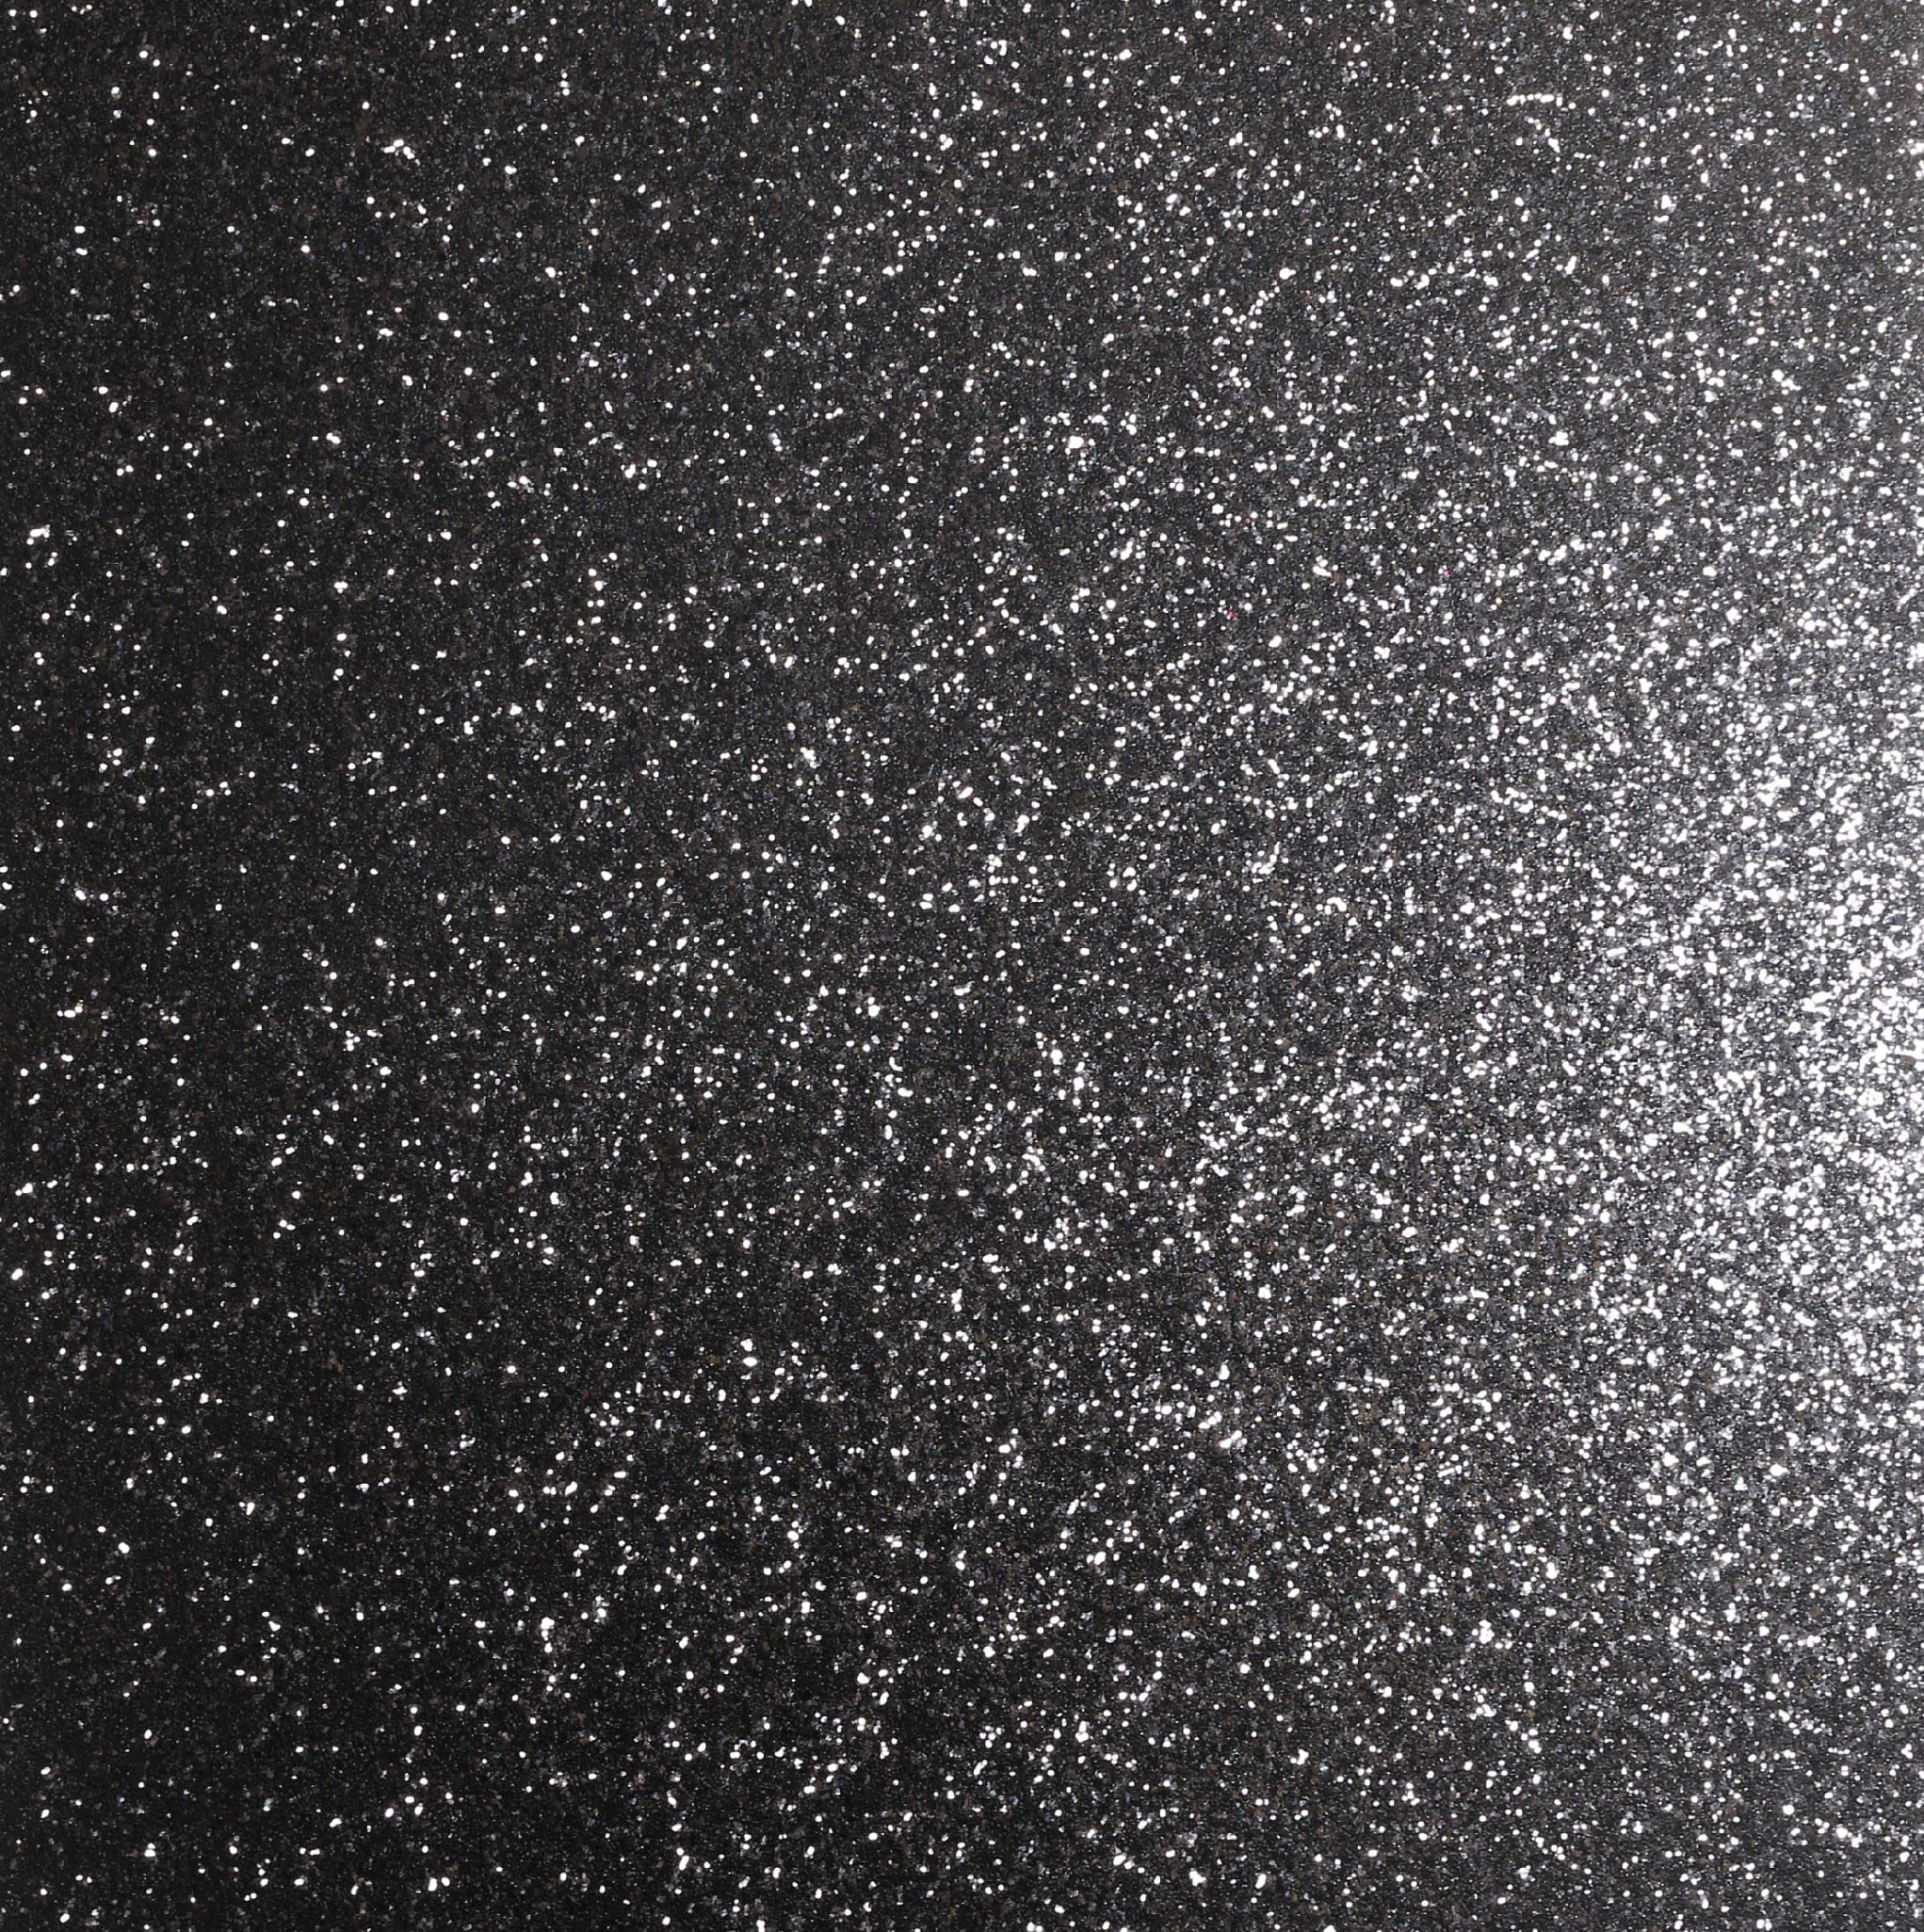 Arthouse Sequin Sparkle & Shimmery Textured Black Wallpaper Maximum Glitz to Any Room Designed to Turn Heads Bouncing Sequins Day or Night.5ft x